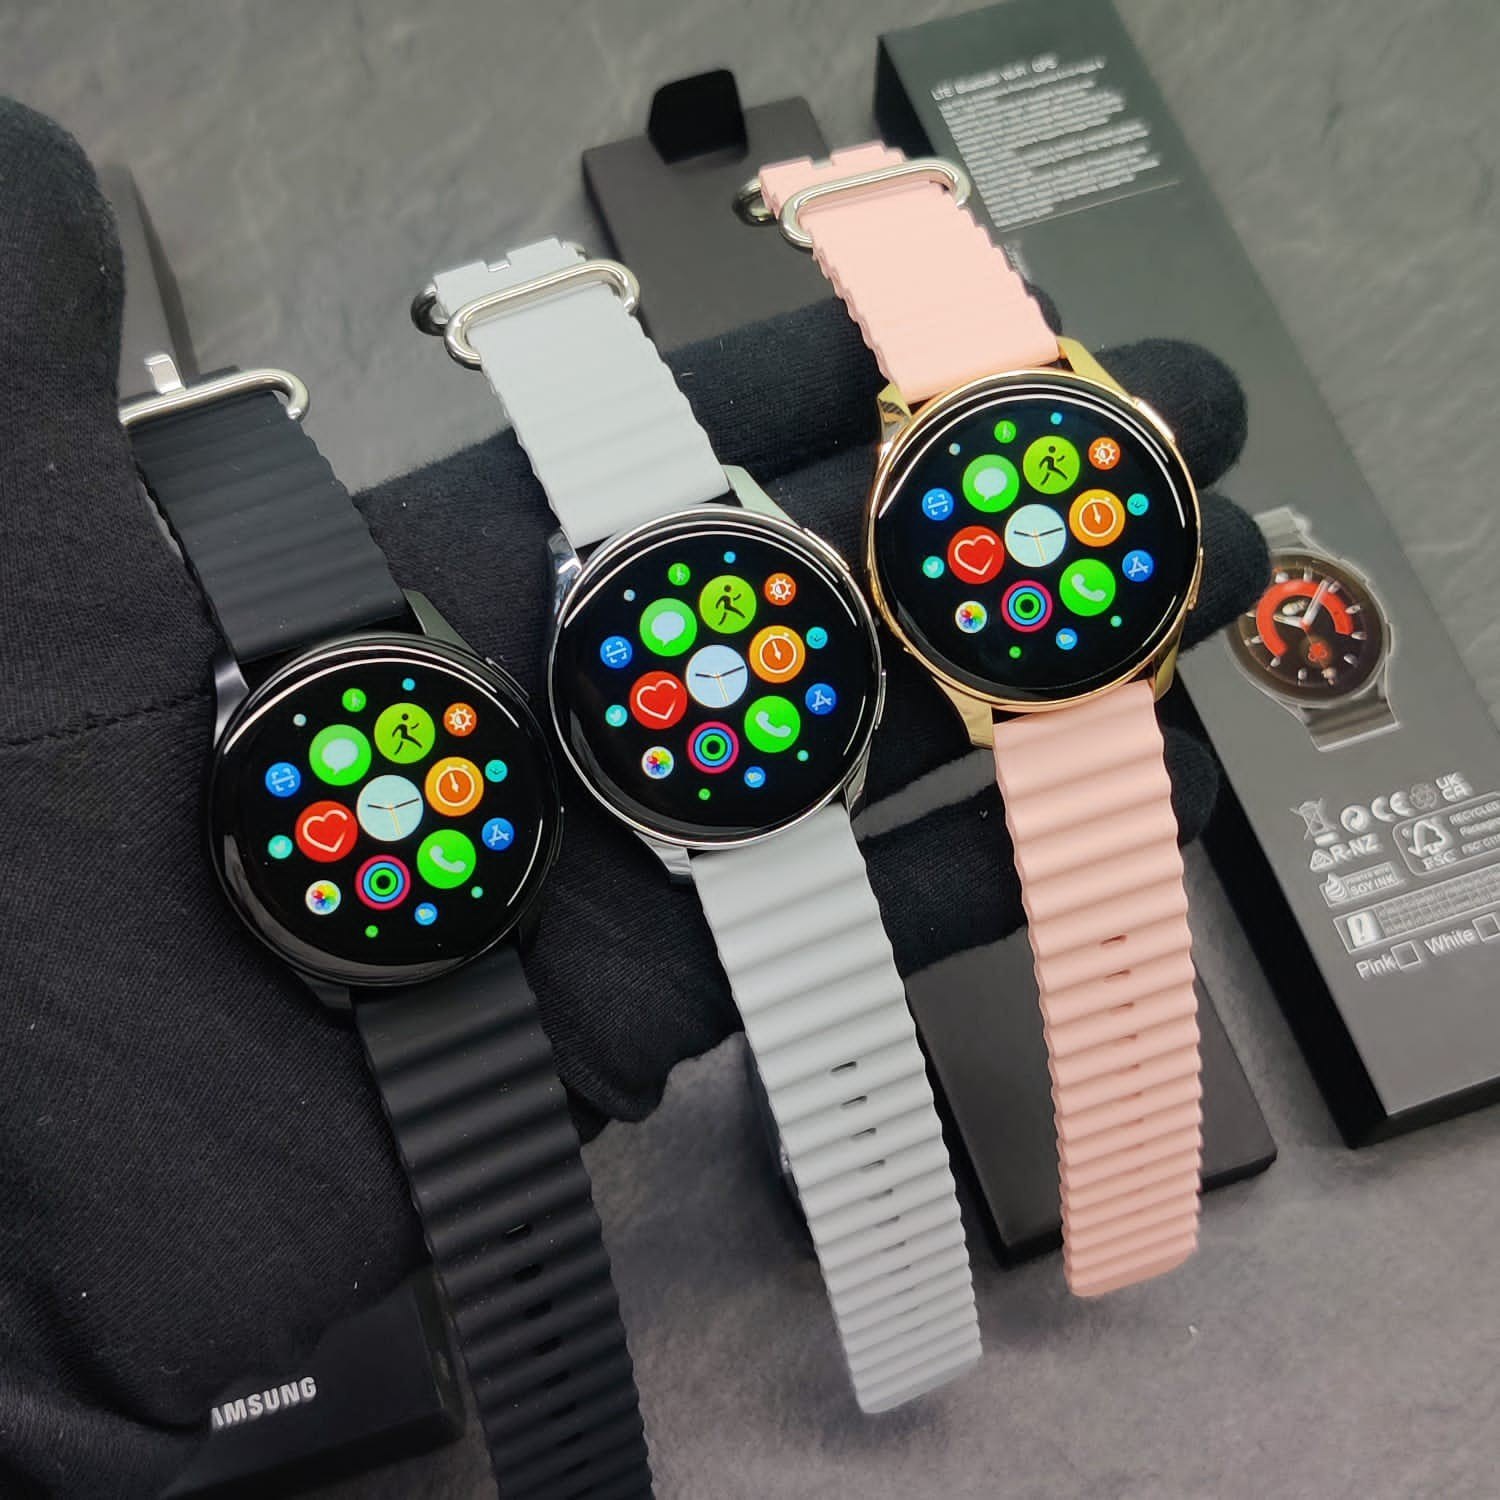 Samsung Smartwatches for Android & iOS | Samsung US